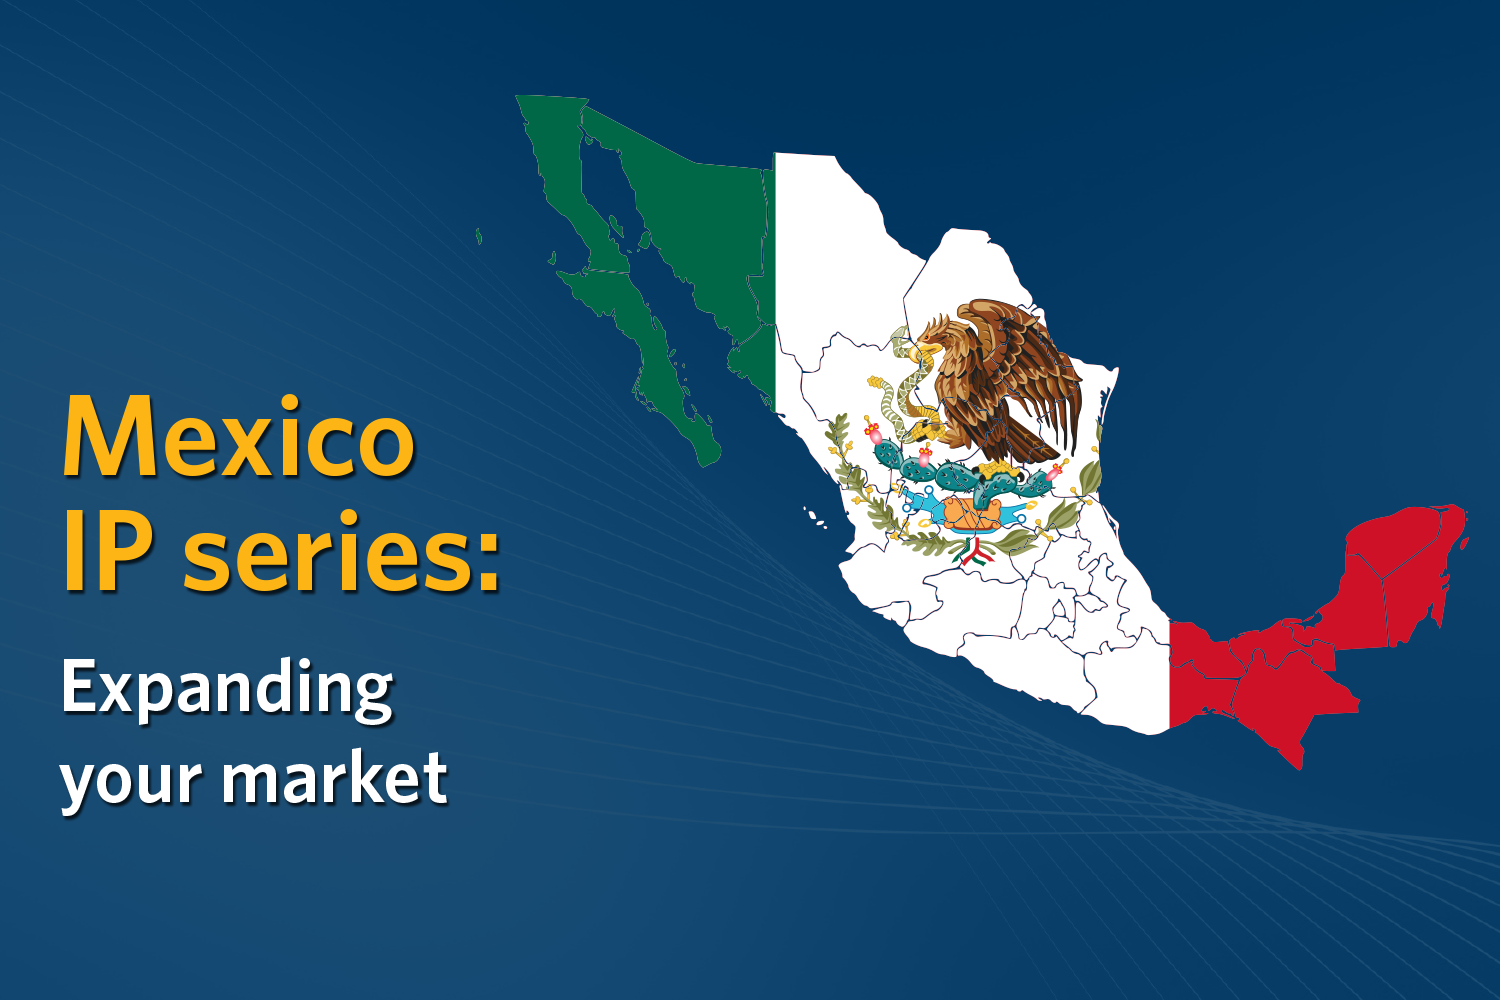 Mexico IP series exporting your market